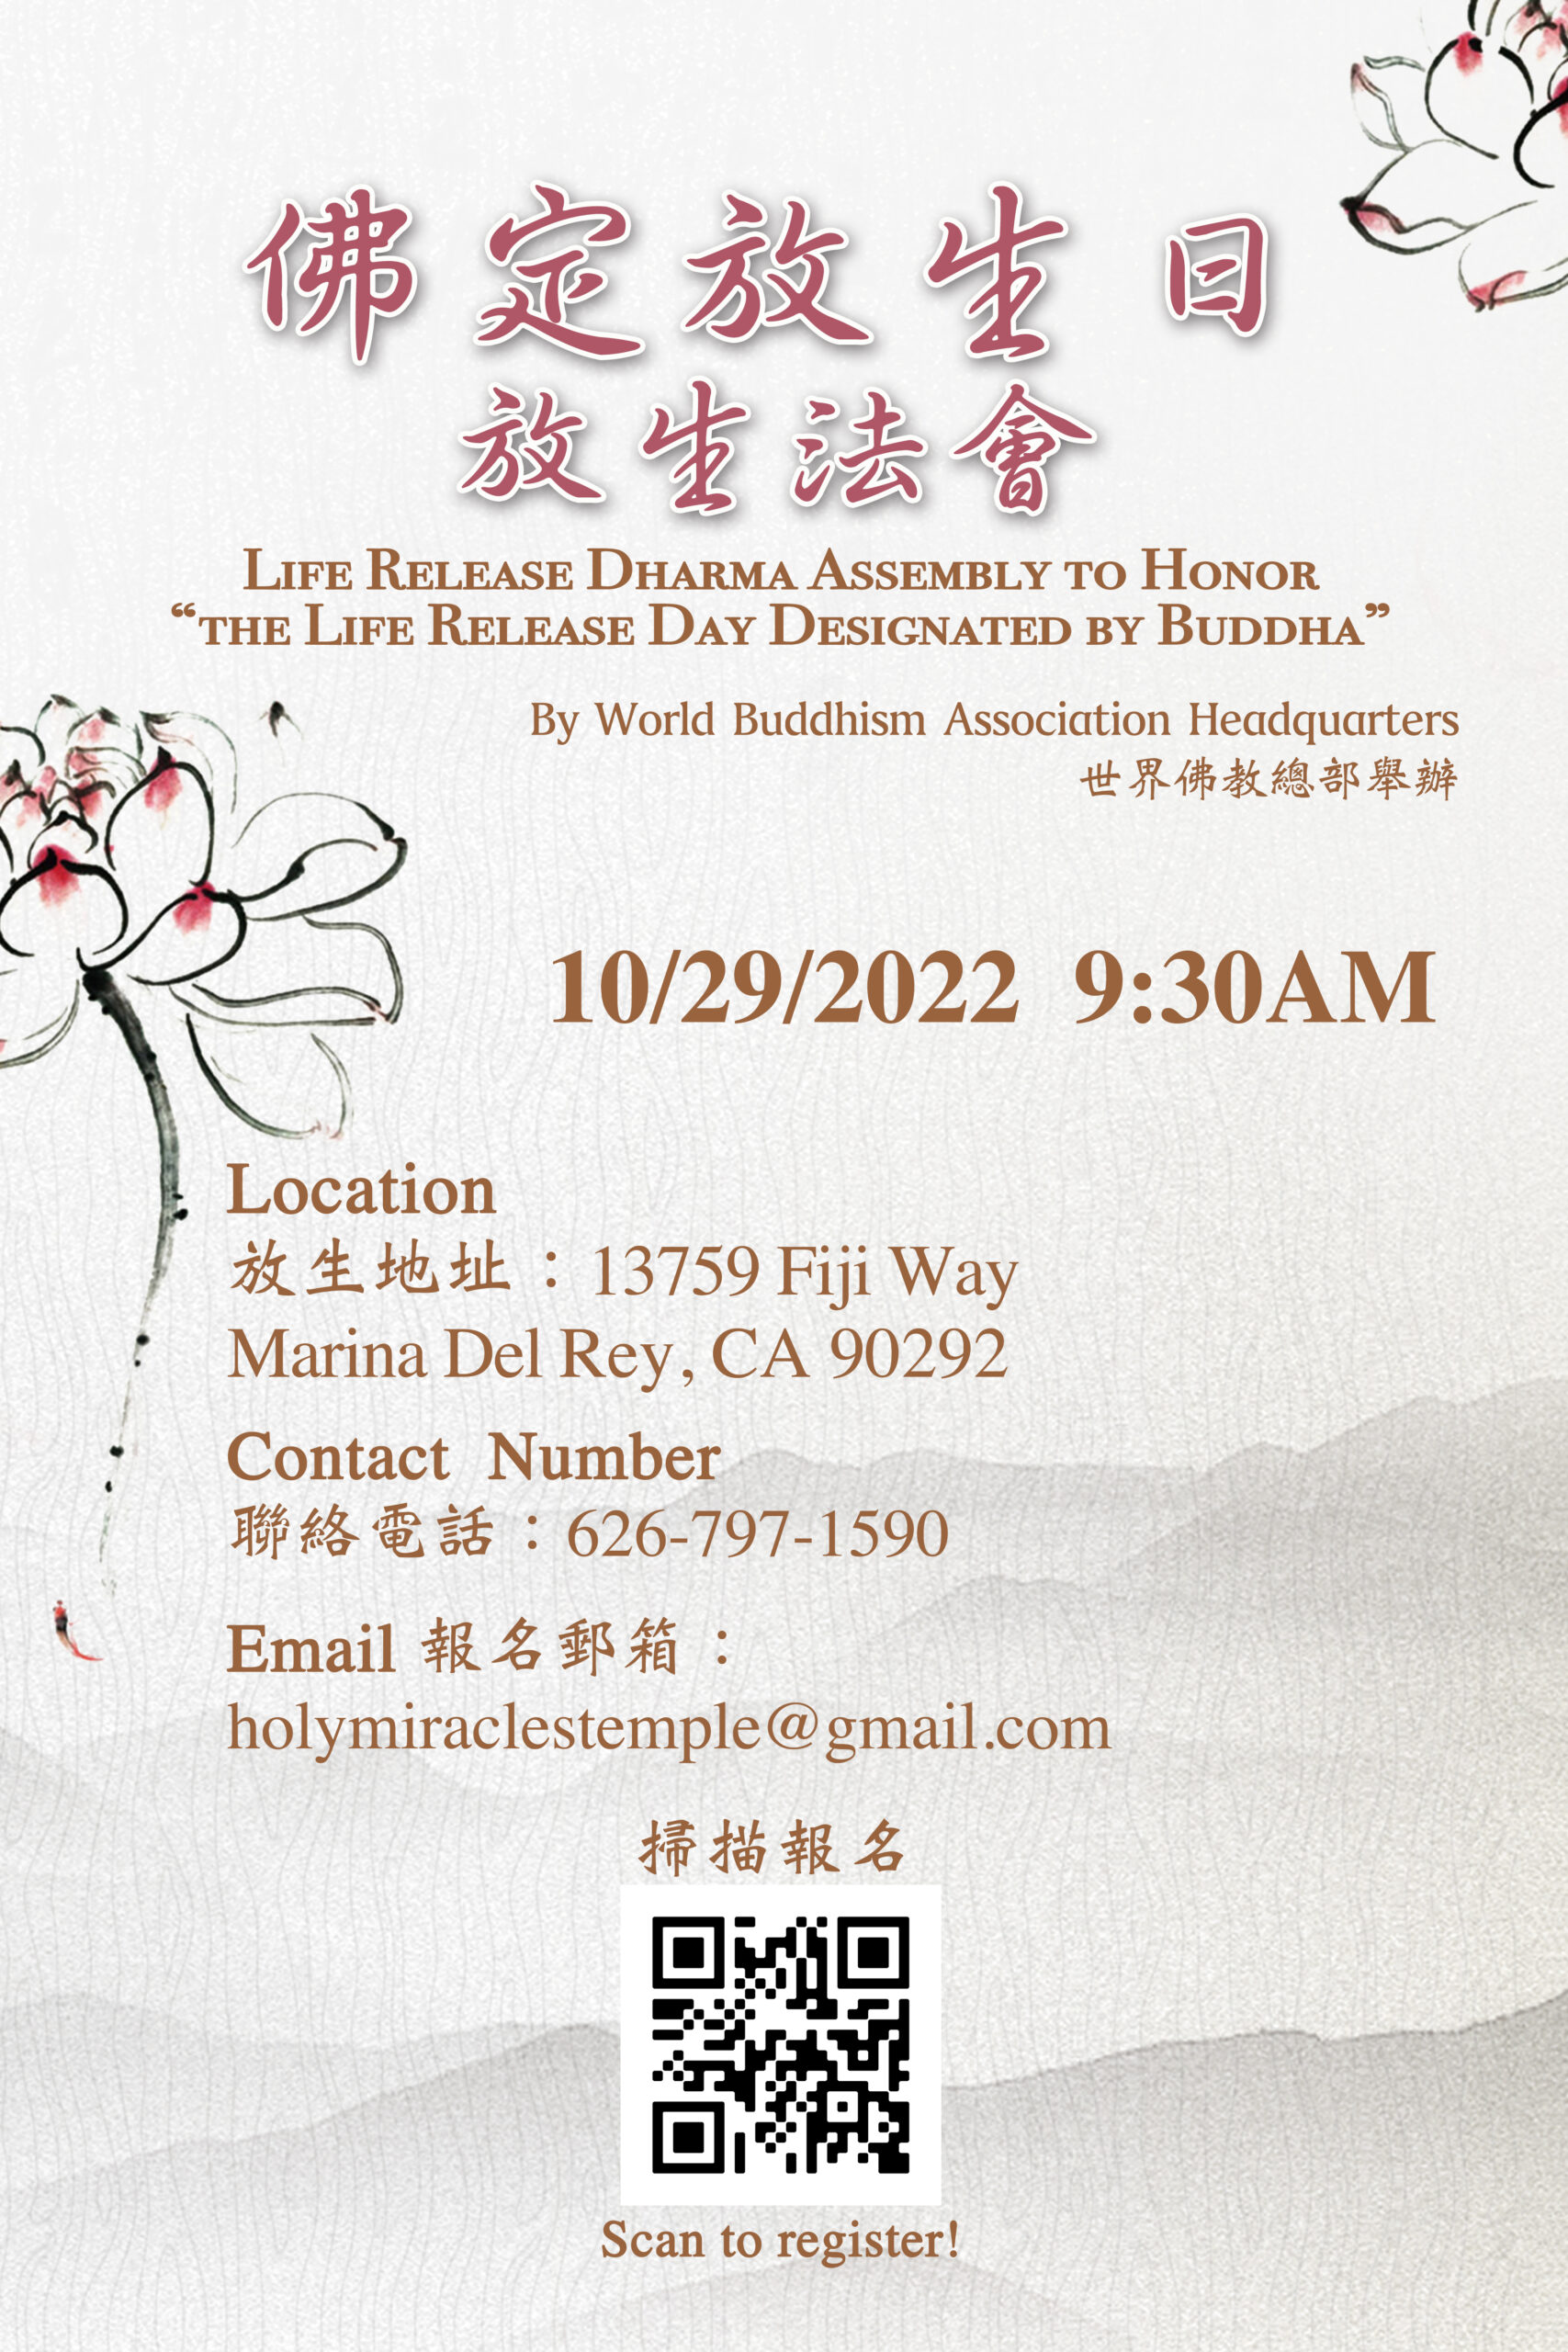 Life Release Dharma Assembly to Honor the  Life Release Day Designated by Buddha